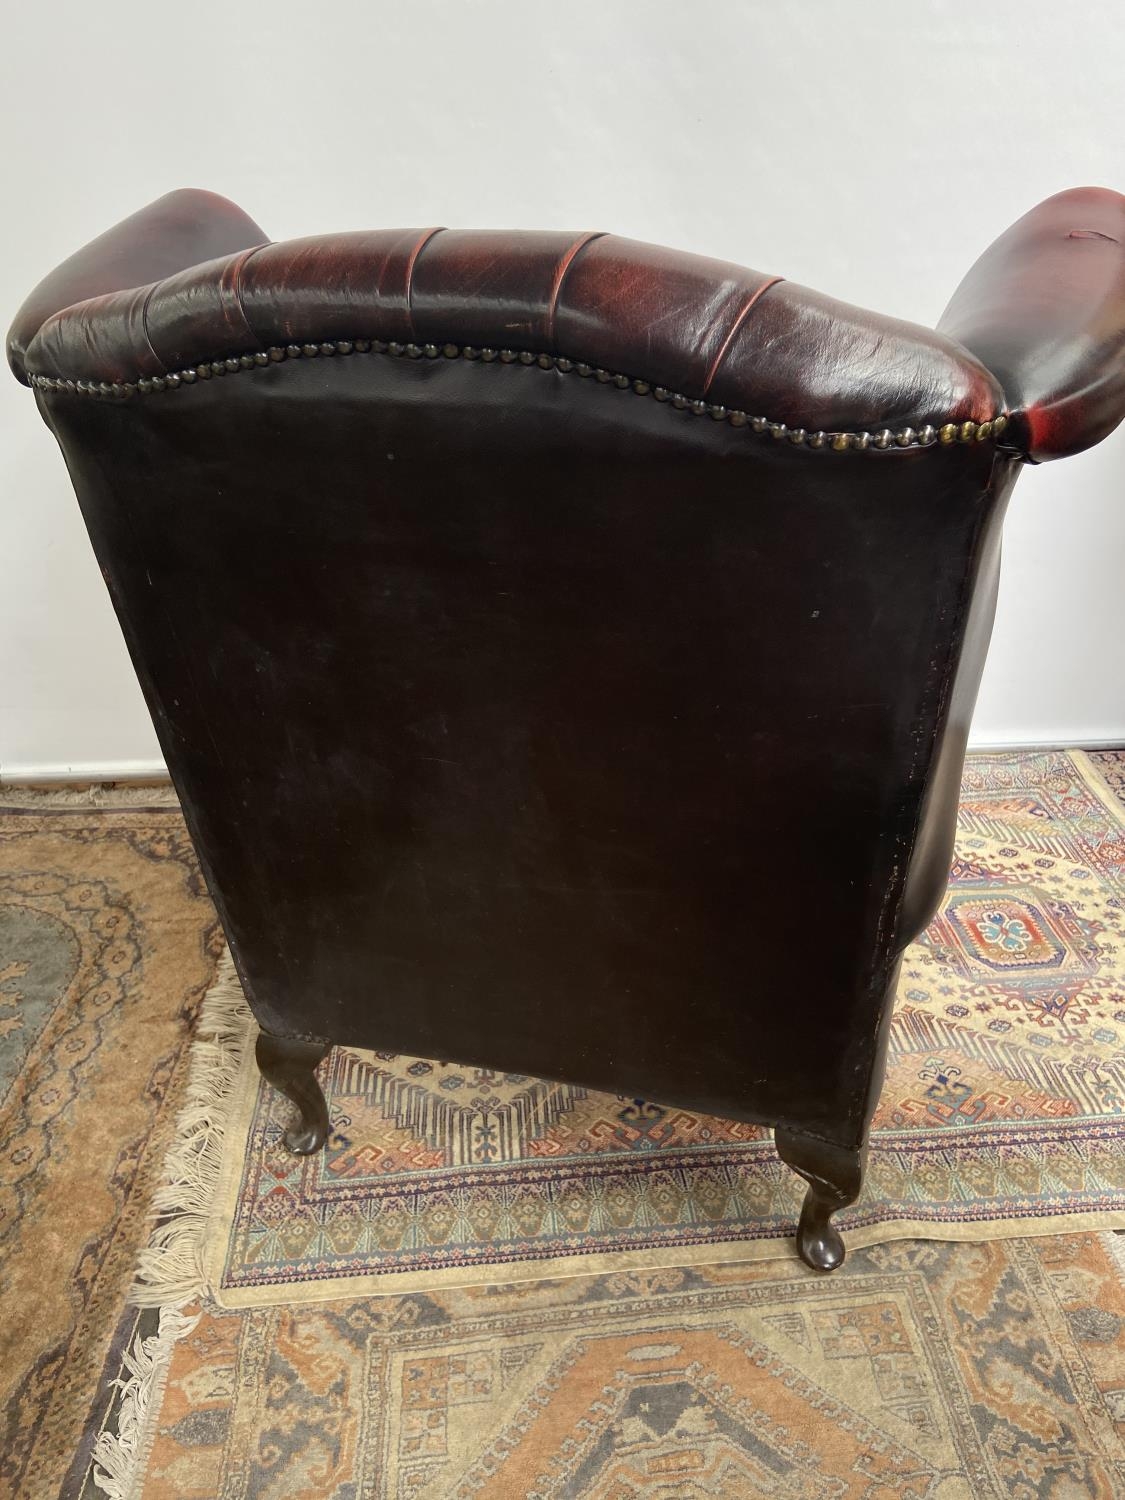 Antique chesterfield oxblood red gull wing arm chair. [107cm in height] - Image 7 of 7